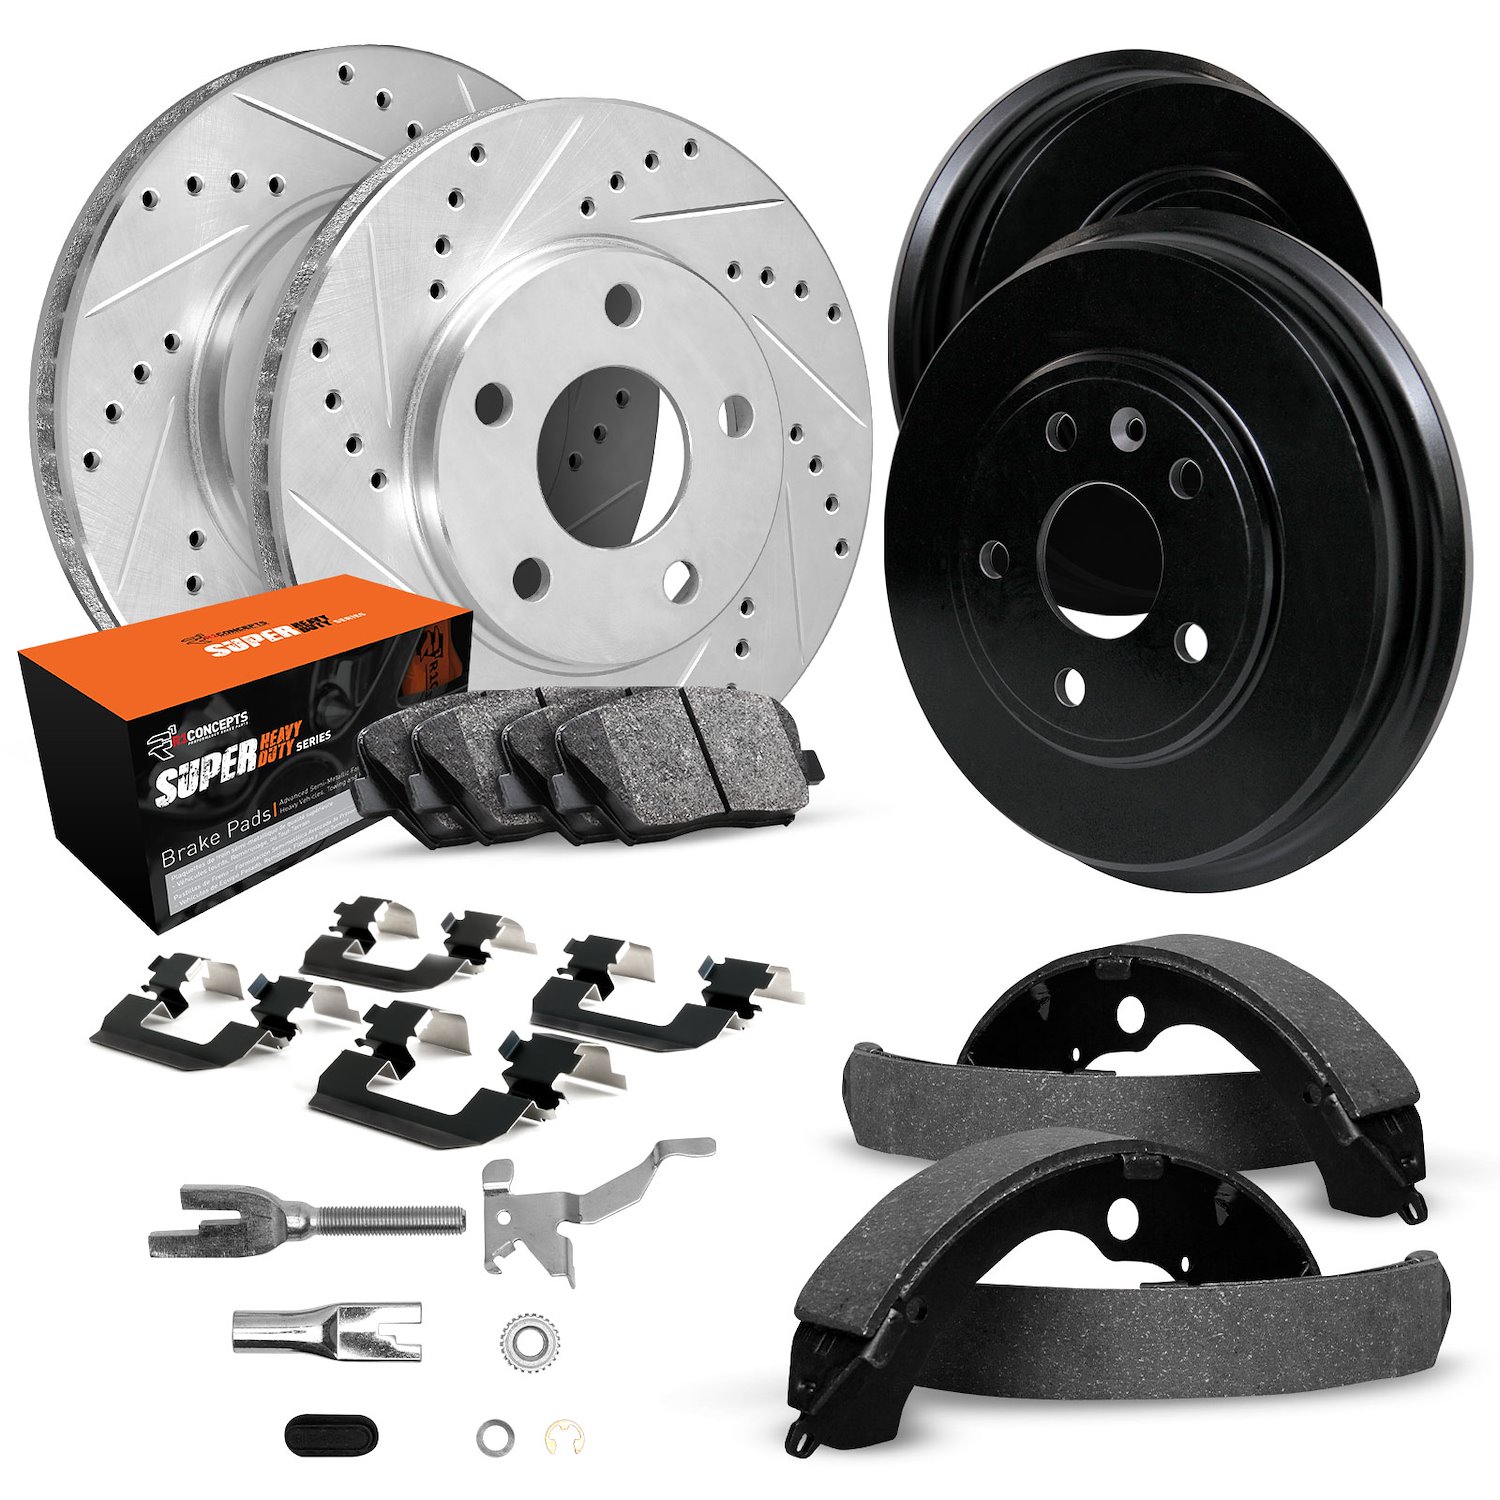 E-Line Drilled/Slotted Silver Rotor & Drum Set w/Super-Duty Pads, Shoes/Hardware/Adjusters, 1990-1993 Mopar